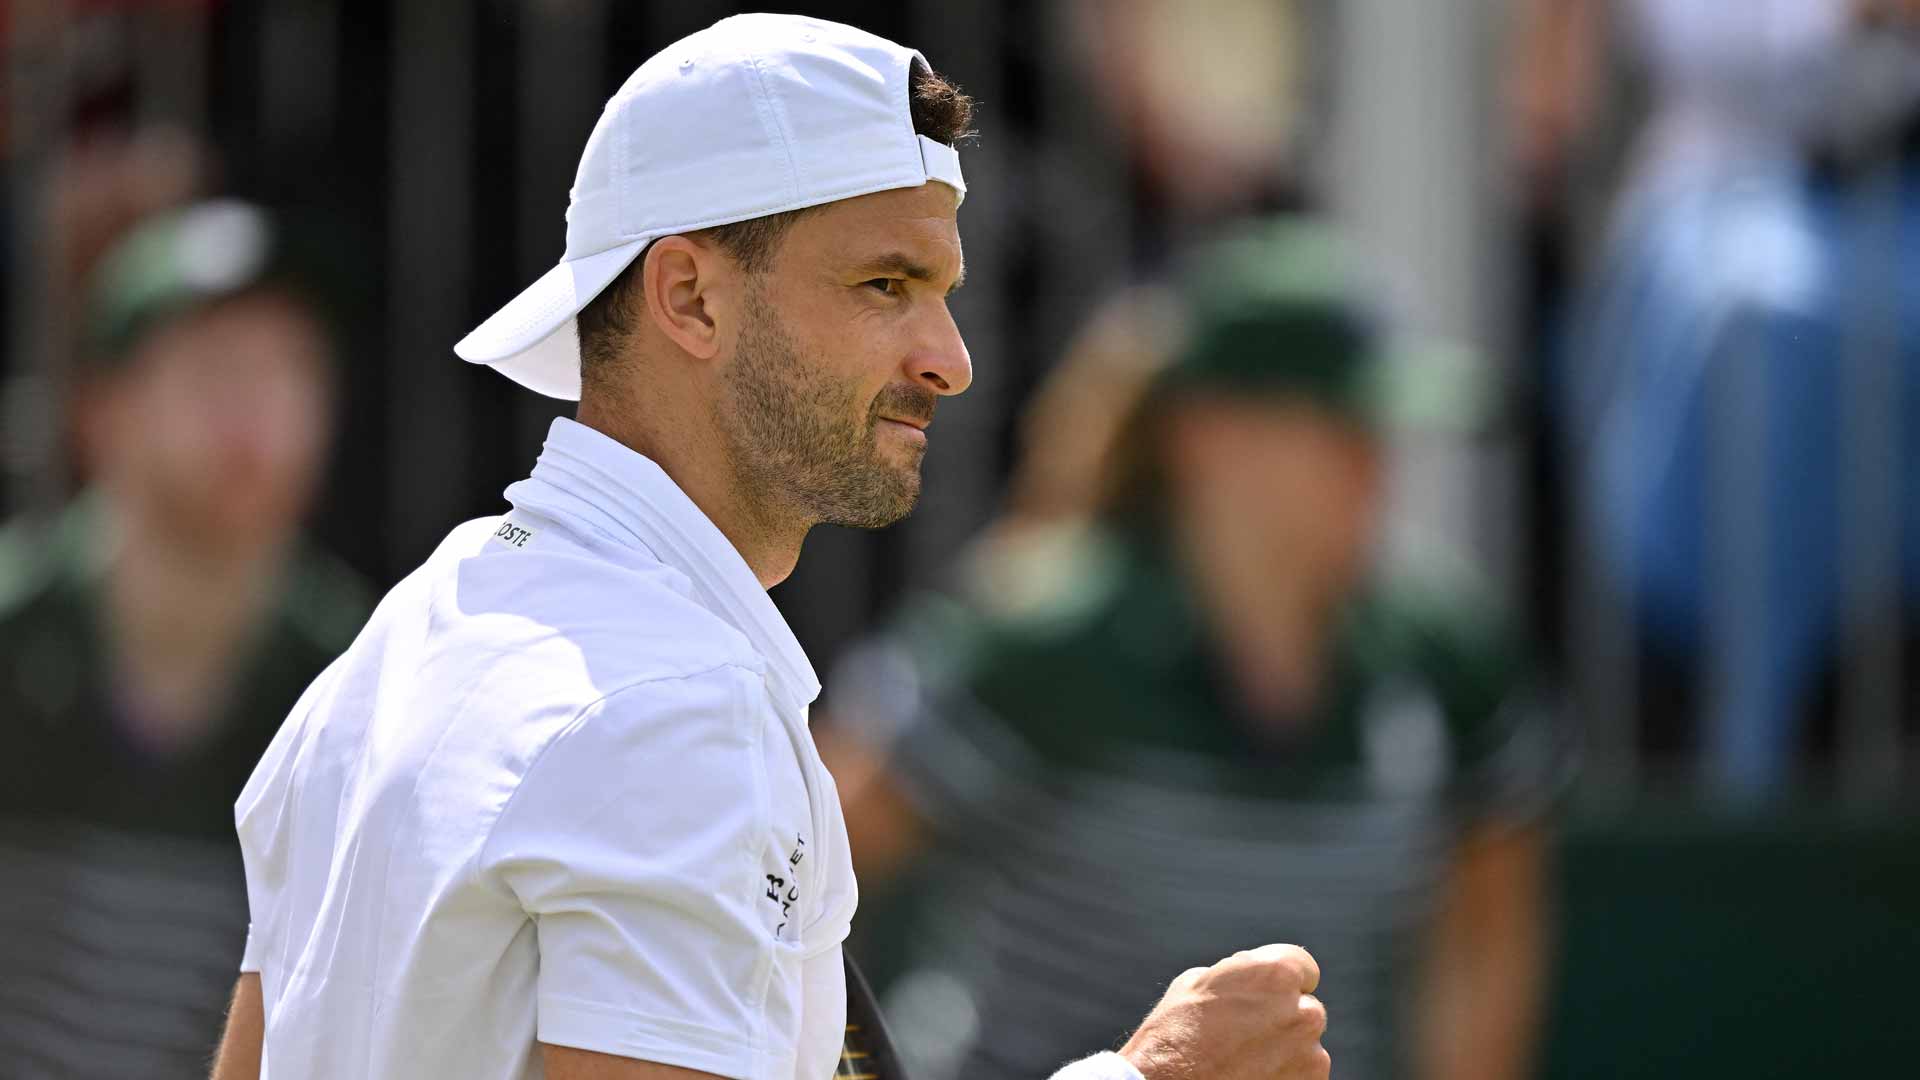 Grigor Dimitrov rallies from two sets down Thursday against Shang Juncheng at Wimbledon.